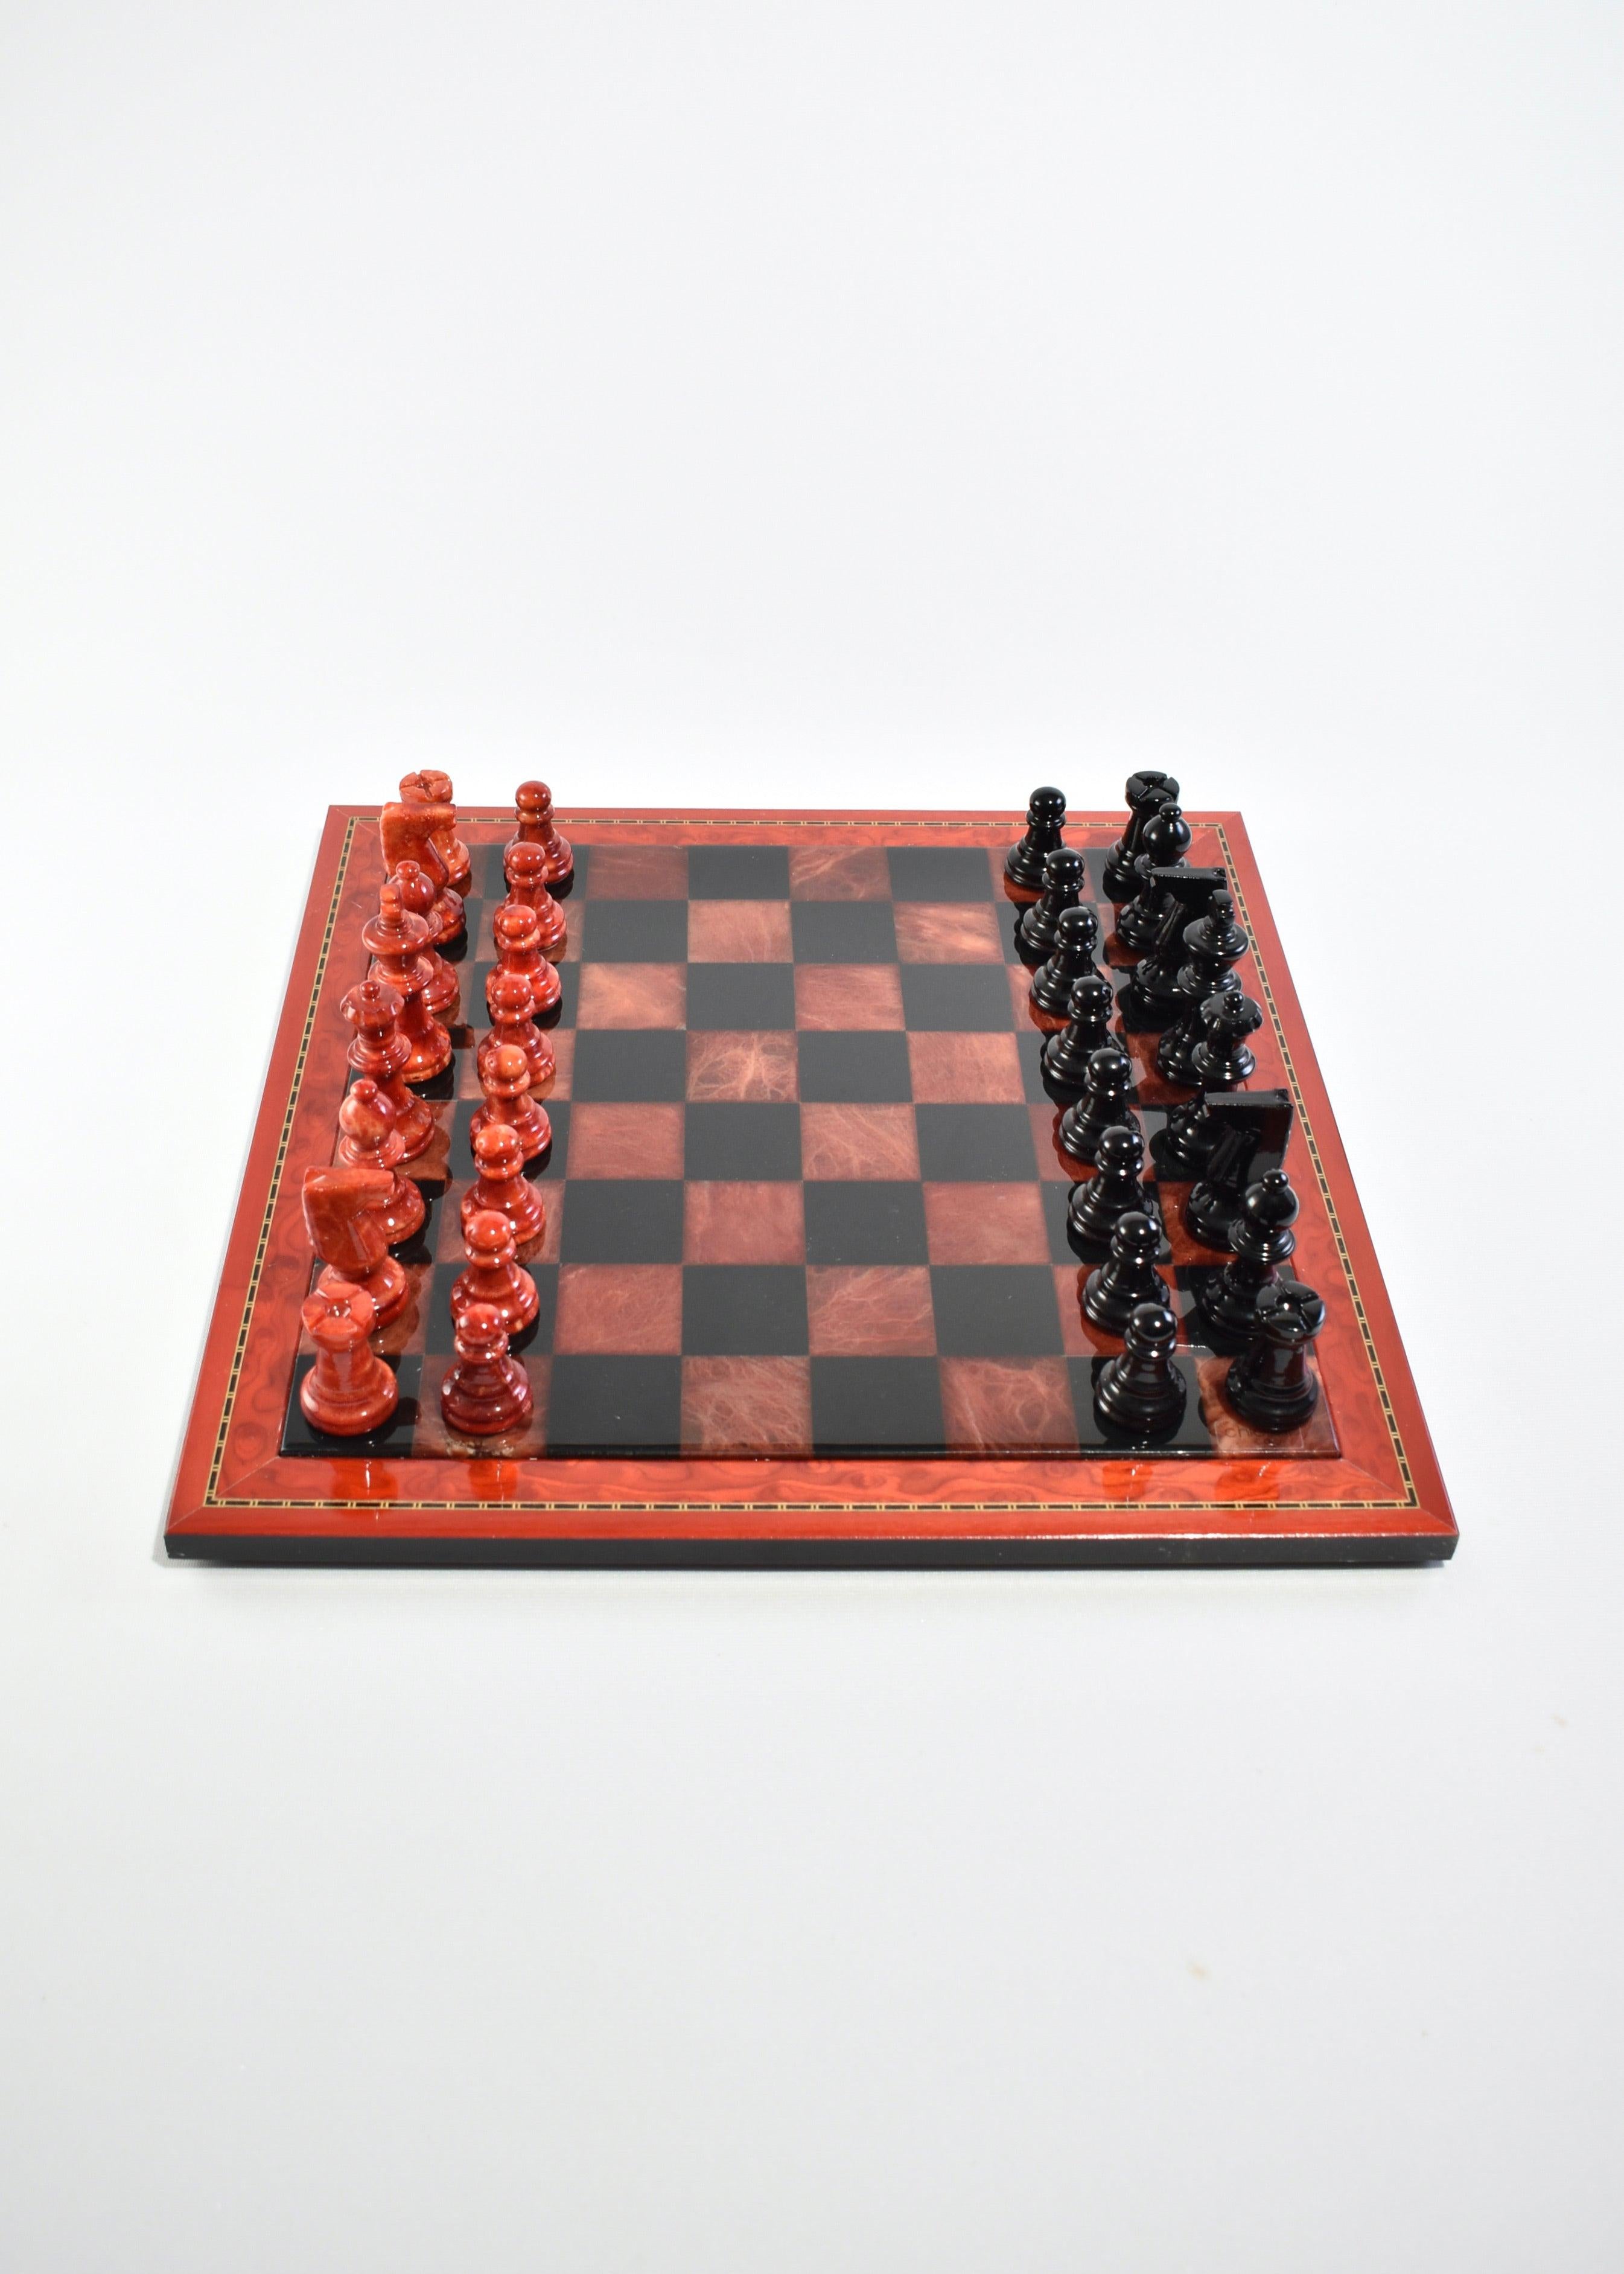 Beautiful, vintage alabaster and black onyx chess set with decorative wood trim.

Dimensions: 
Board measures 15 in (38.1 cm) wide.
Chess pieces measure between 1.5 in (3.81 cm) and 3 in (7.62 cm) tall.